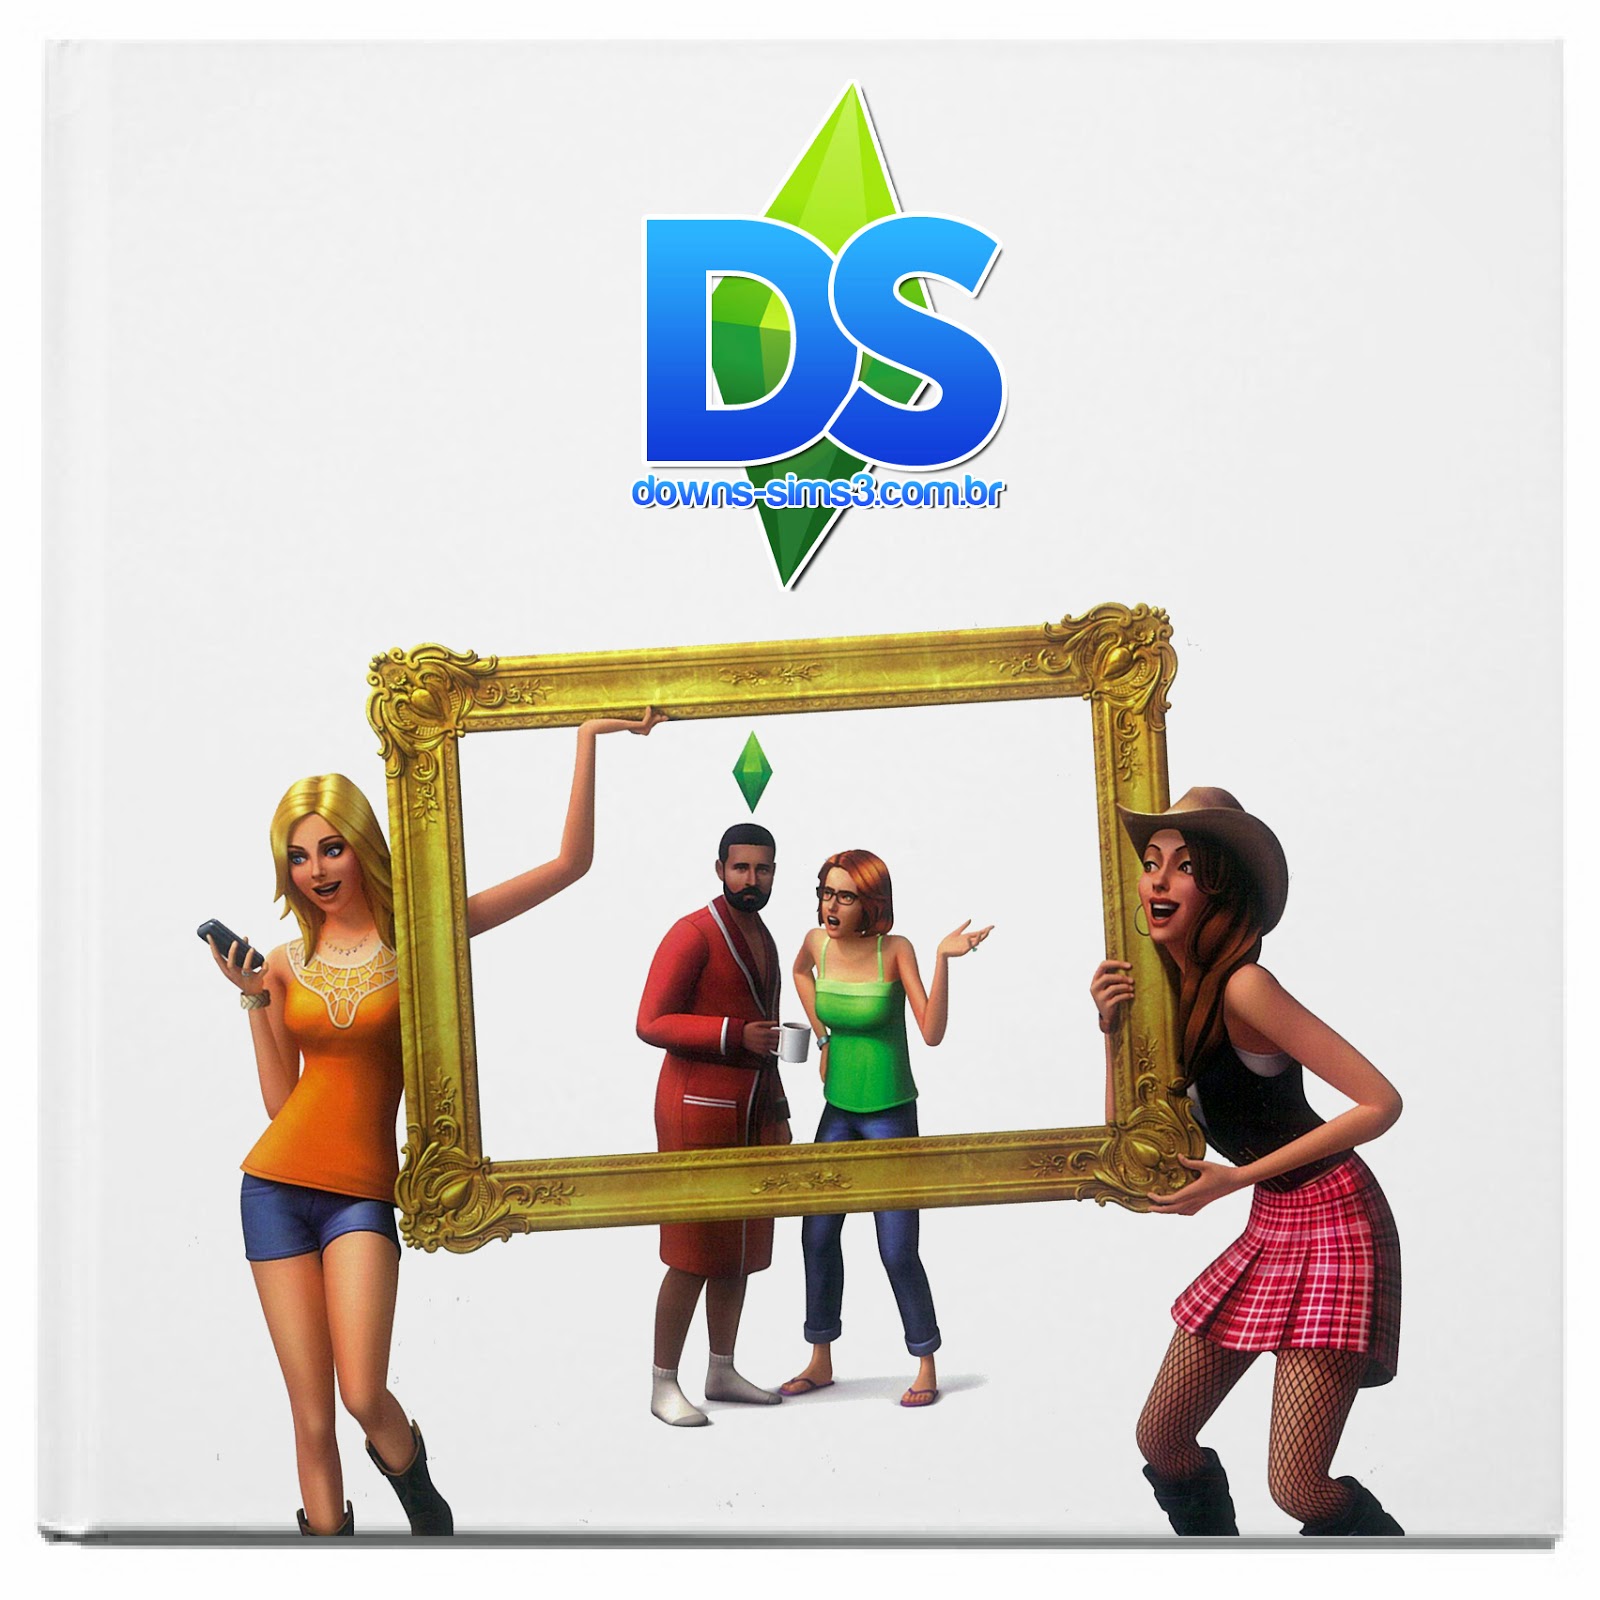 the sims 4 download 4shared